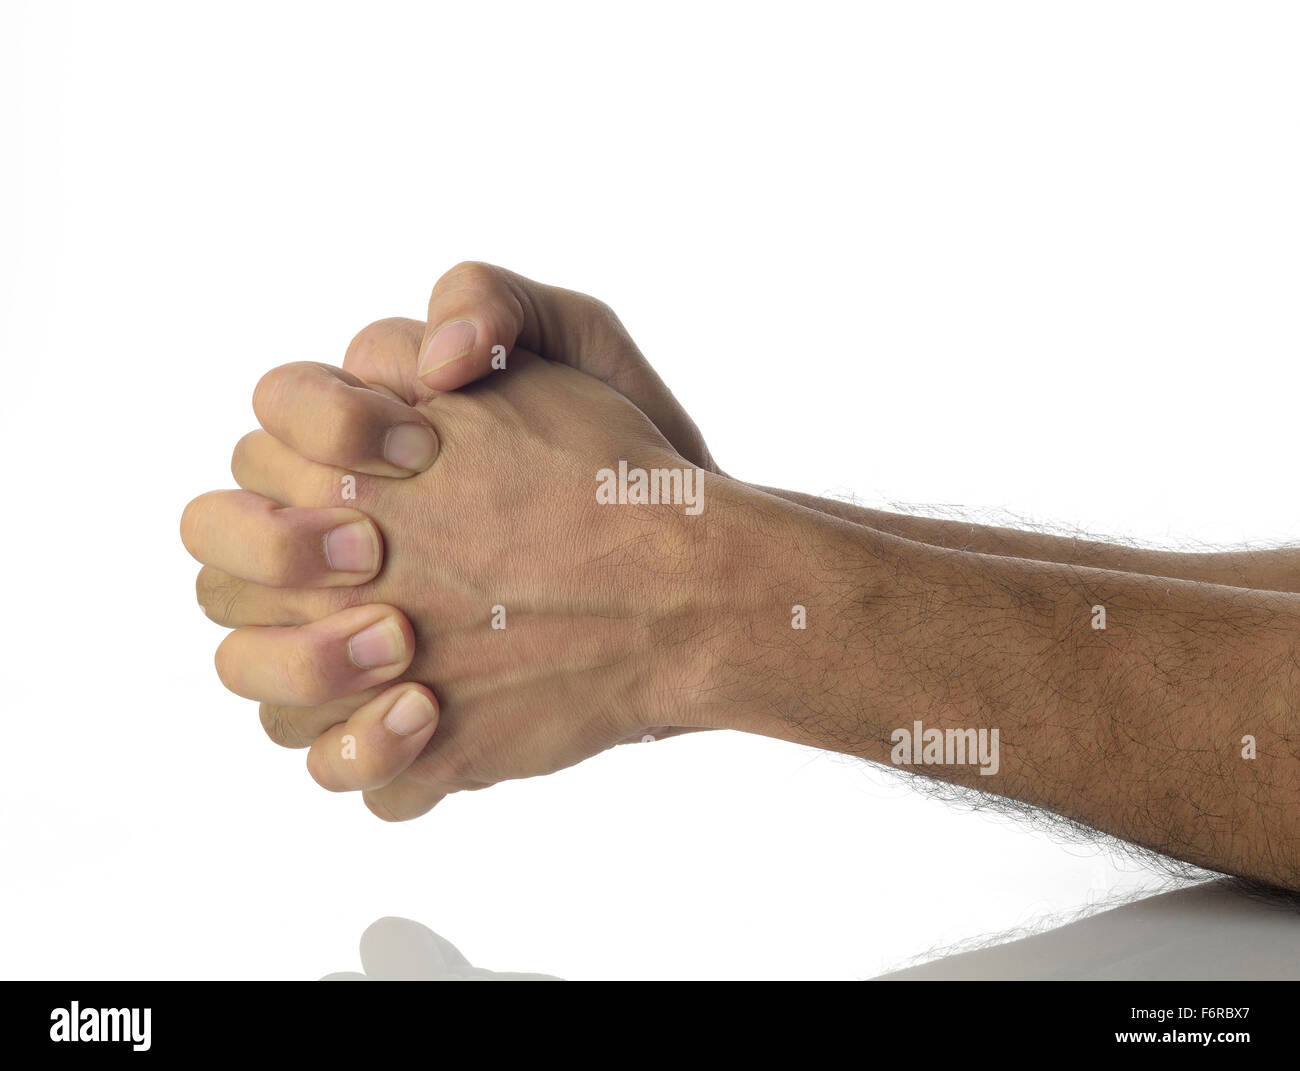 Human hands showing nervousness. Stock Photo